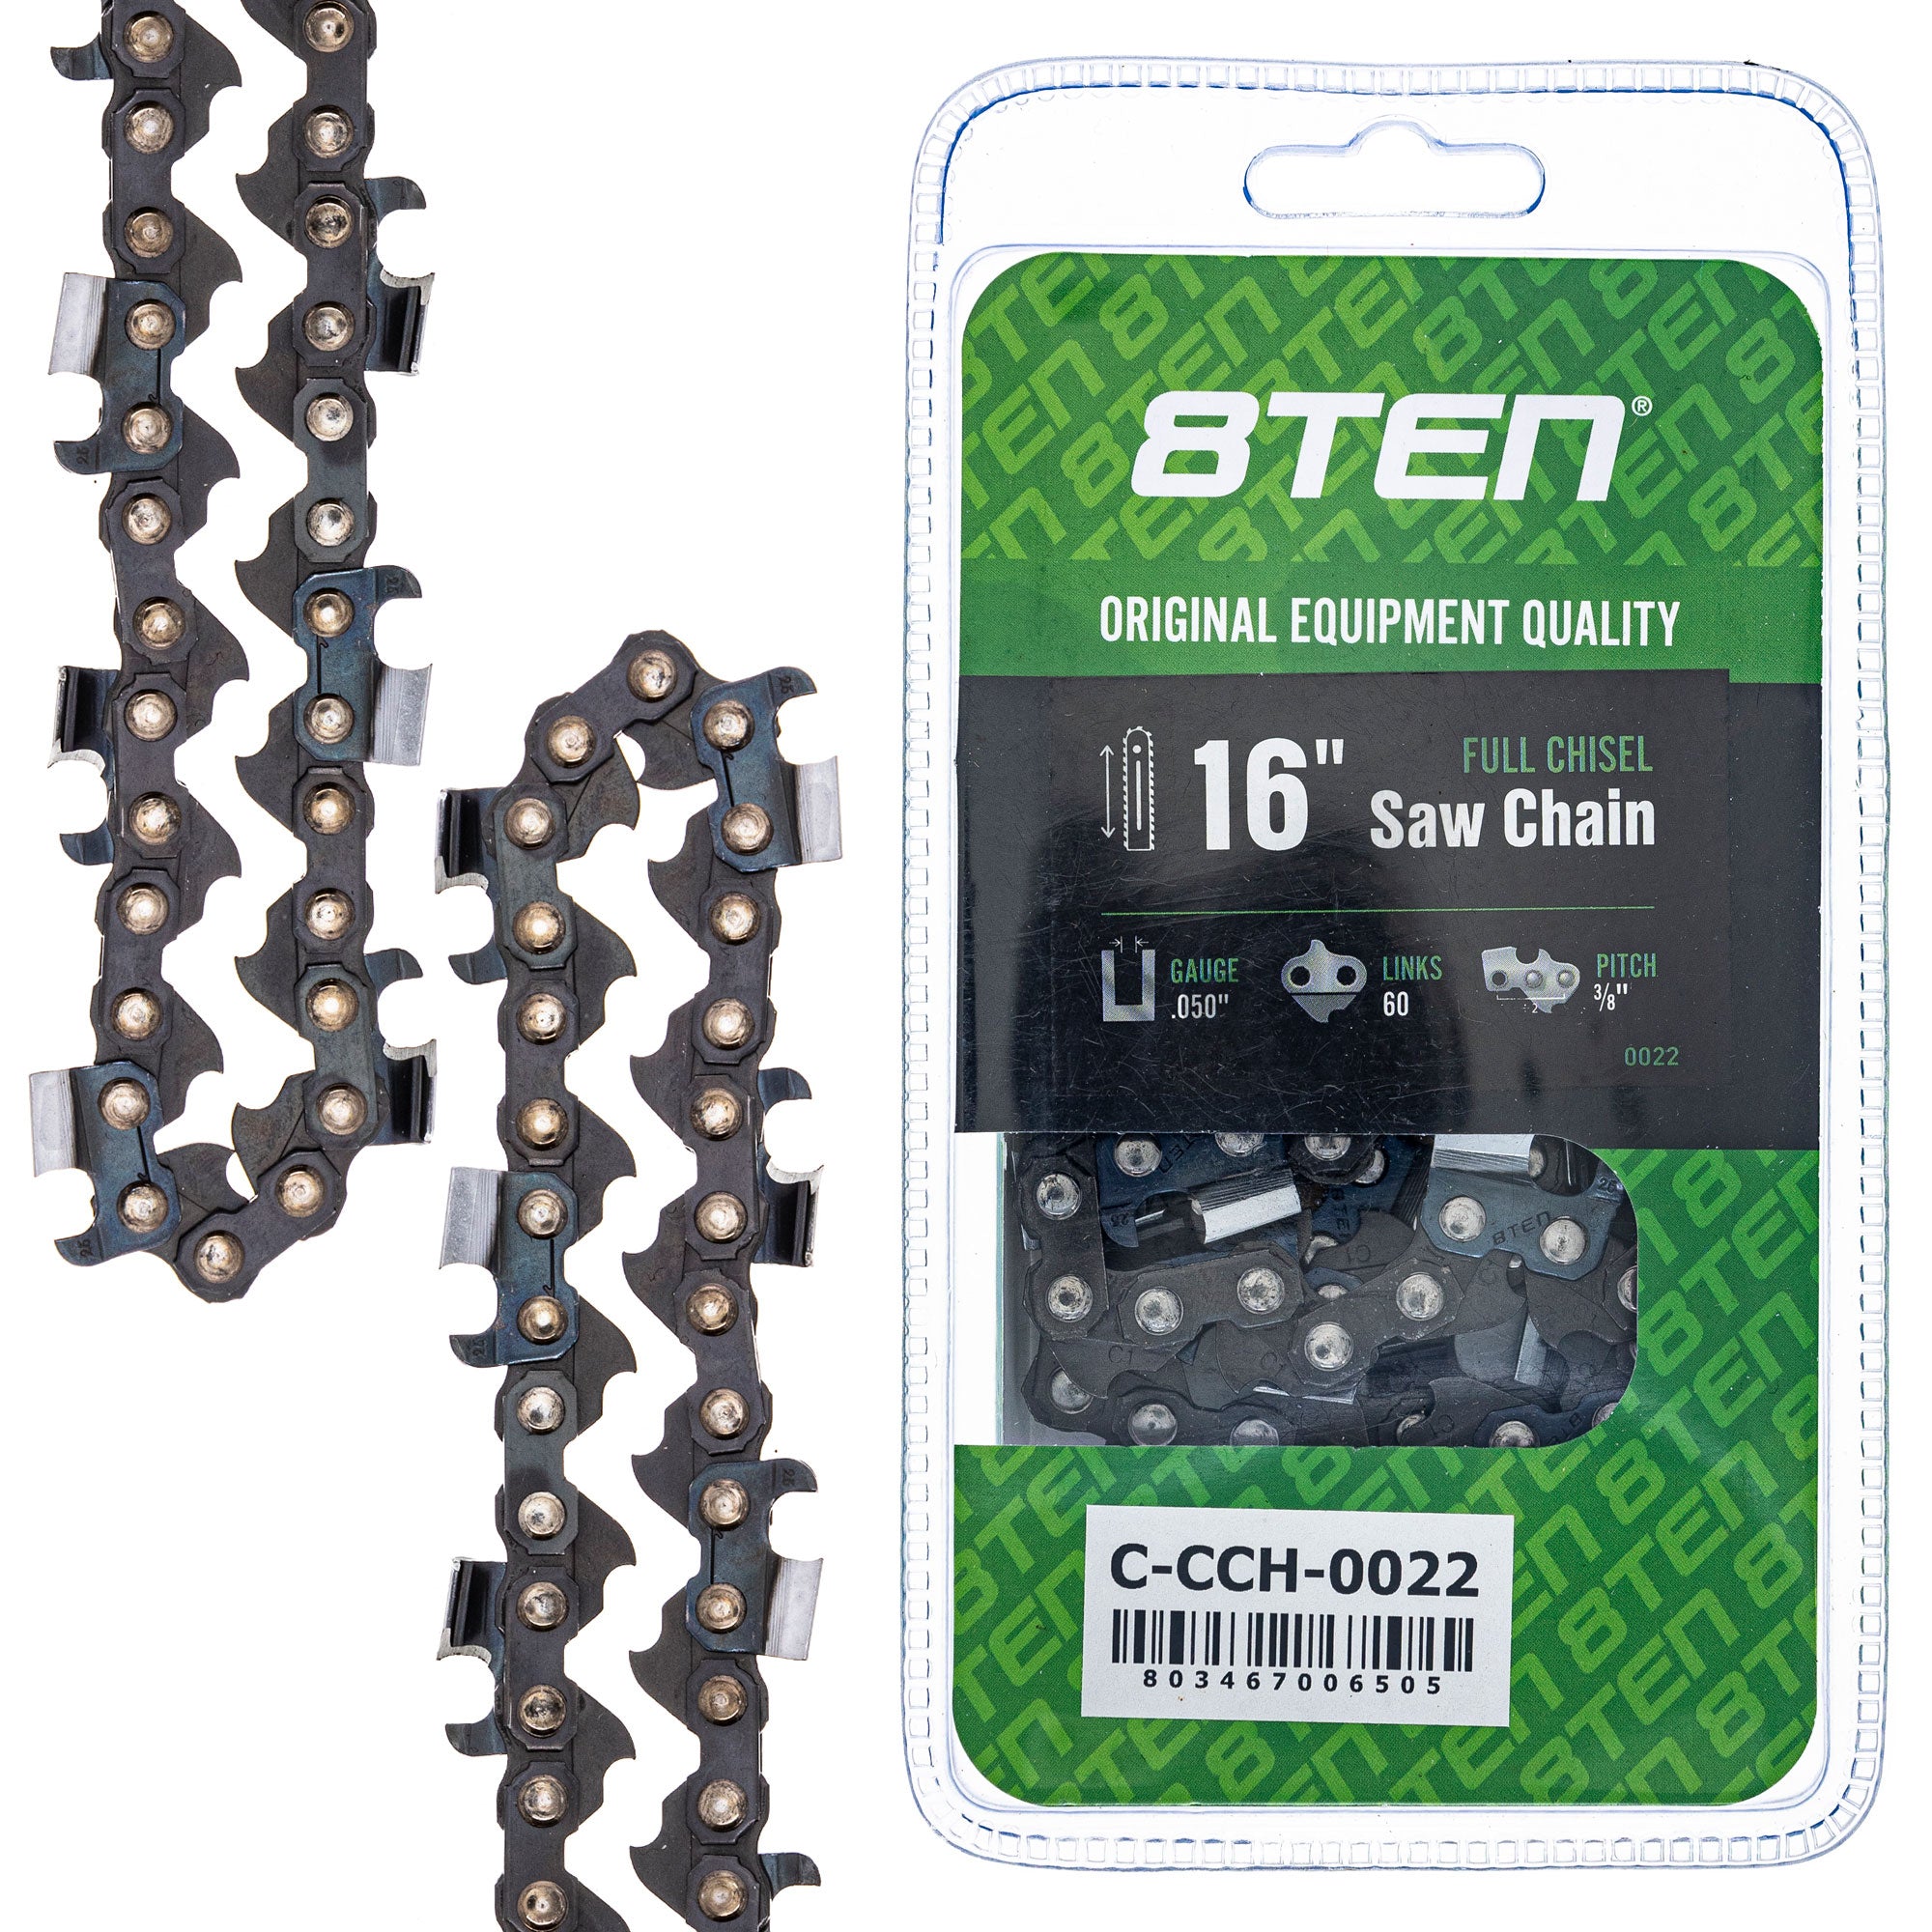 8TEN MK1010238 Guide Bar & Chain for MSE MS E 634